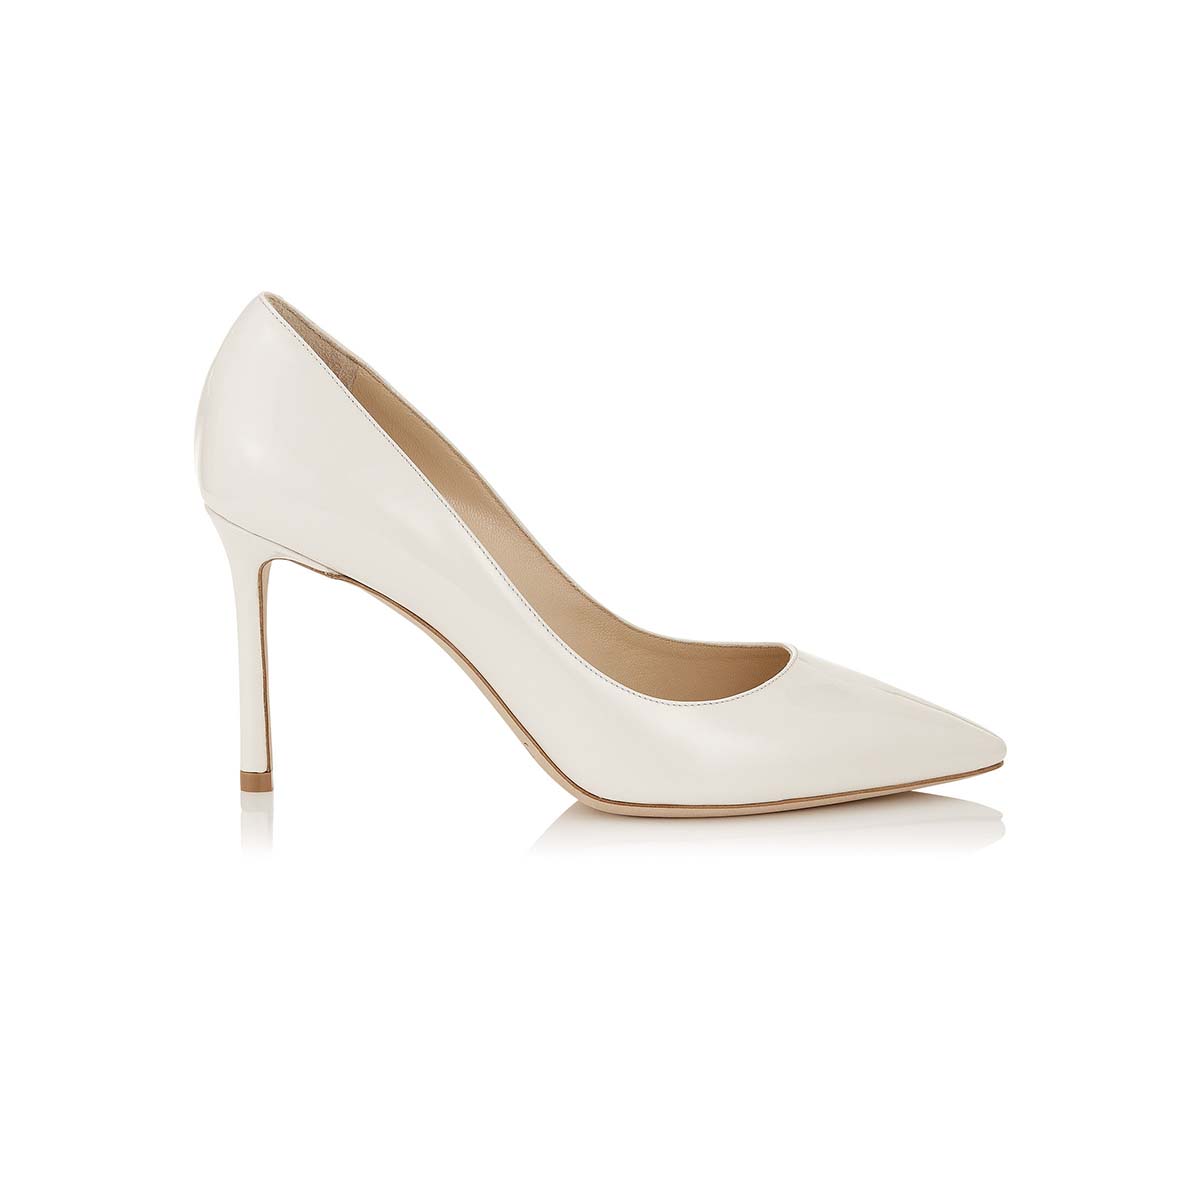 Jimmy Choo Women Romy 85 Patent Leather Pointy Toe Pumps Shoes-White